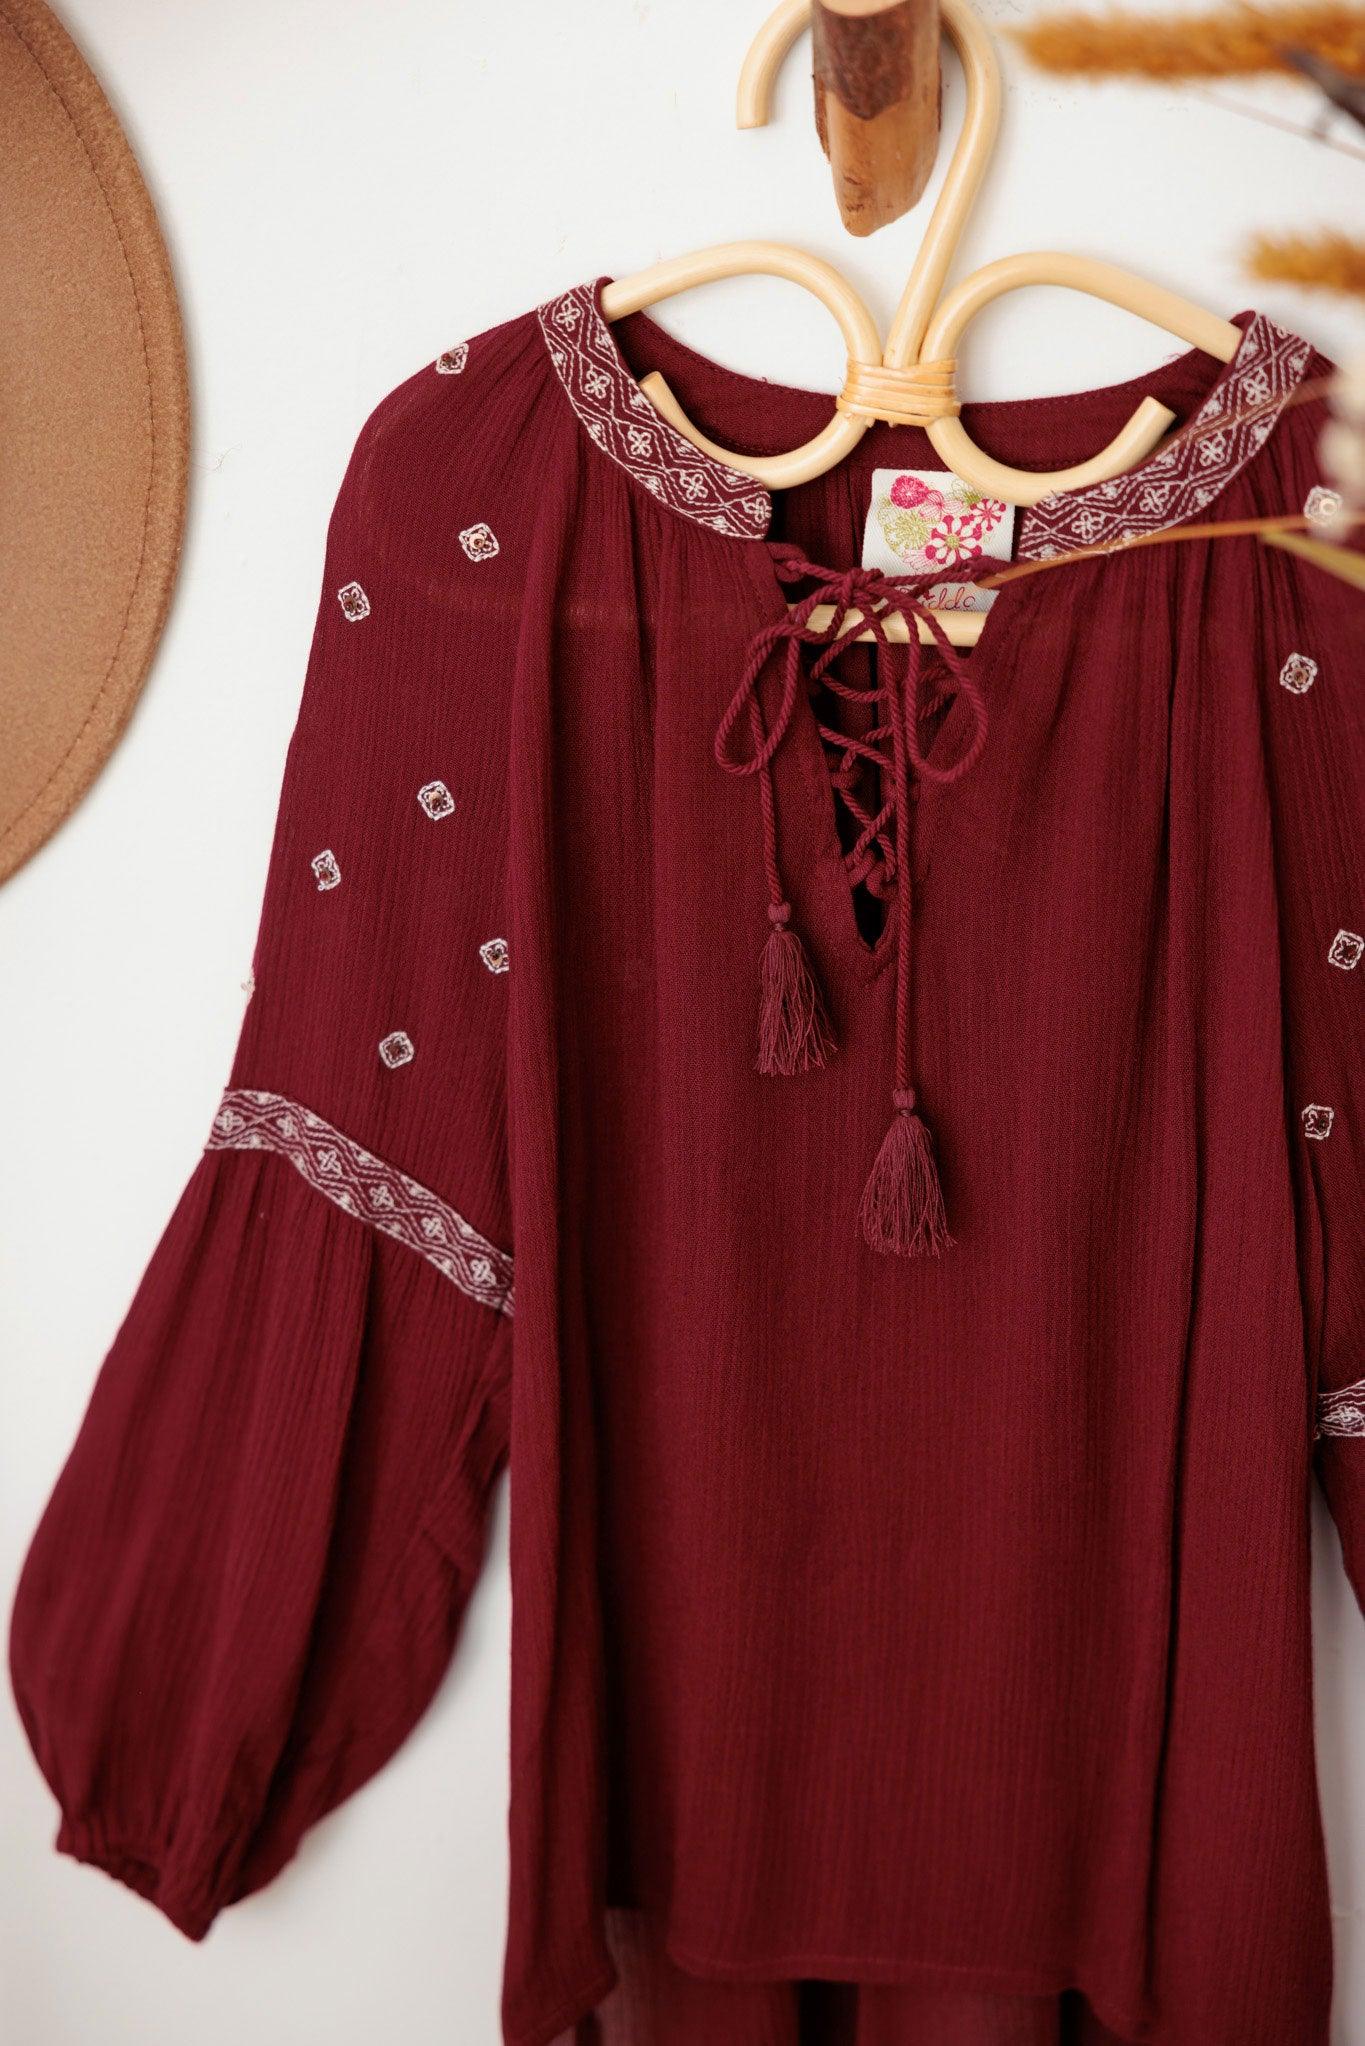 Girls Ethnic Boho Embroidered Front Tie Top